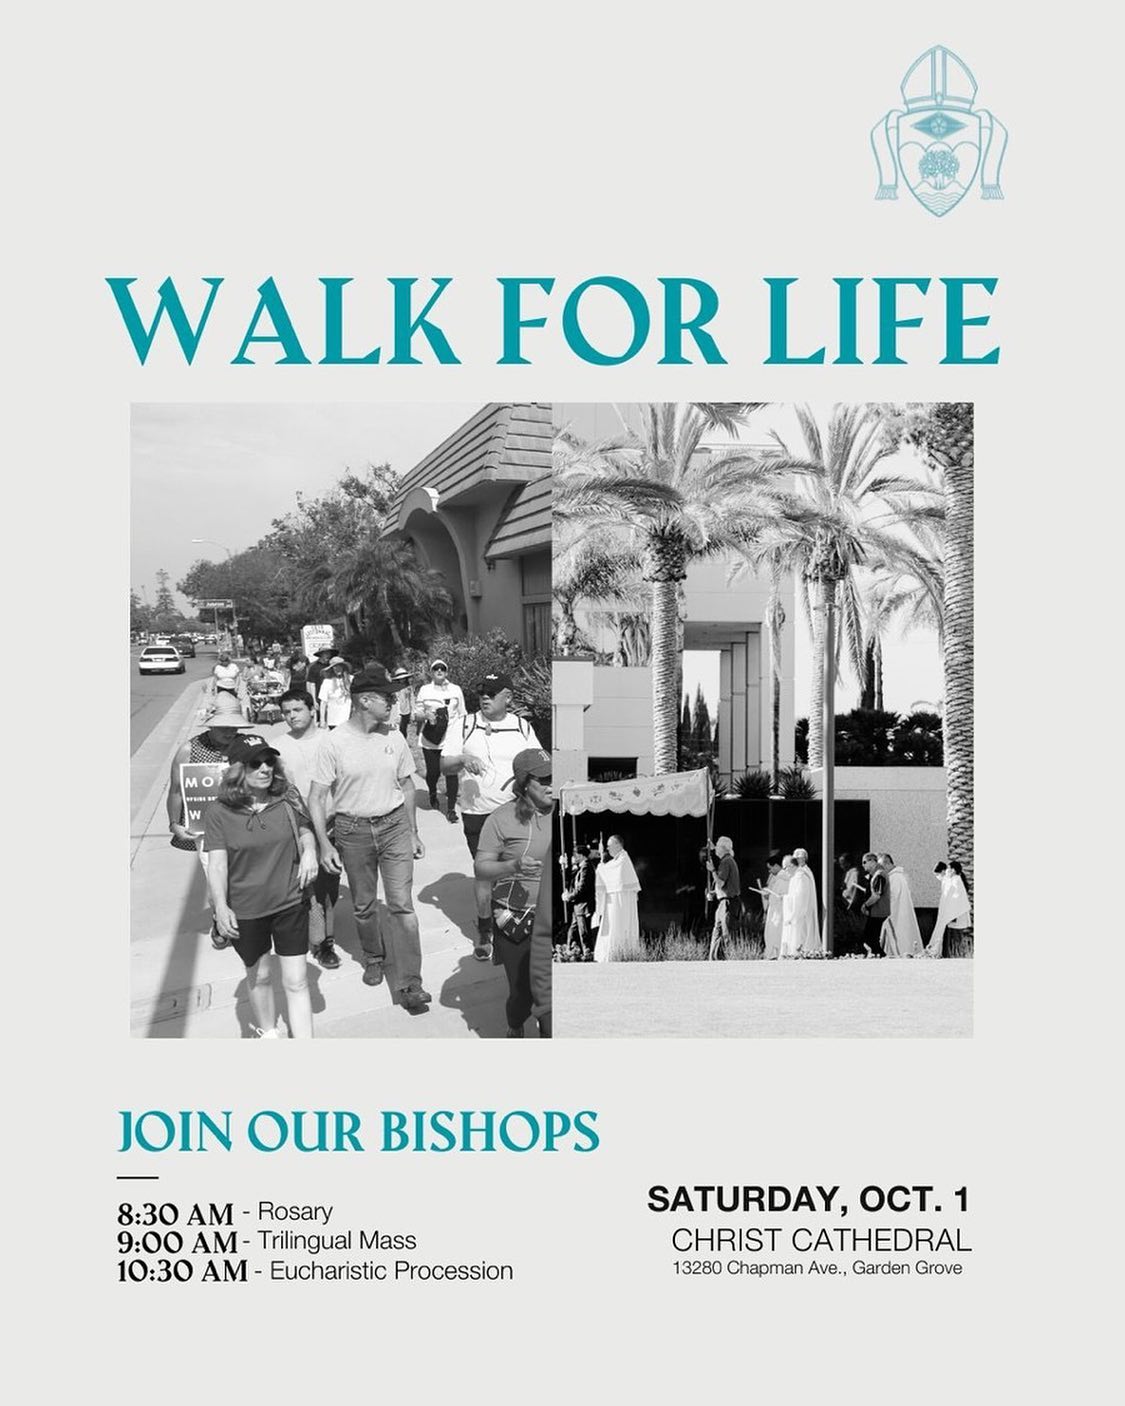 Join us at Christ Cathedral this Saturday for the Orange Walk for Life!

This event will feature a Rosary (8:30 AM), Trilingual Mass (9:00 AM), and a Eucharistic Procession (10:30 AM) to kick off the Respect Life month of October. 🙌

At the event, you can hear from pro-life guest speakers & meet local pro-life organizations.

Thank you to the Orange County chapter of the Knights of Columbus for sponsoring this event!

👉 For more info, visit the link in our bio.